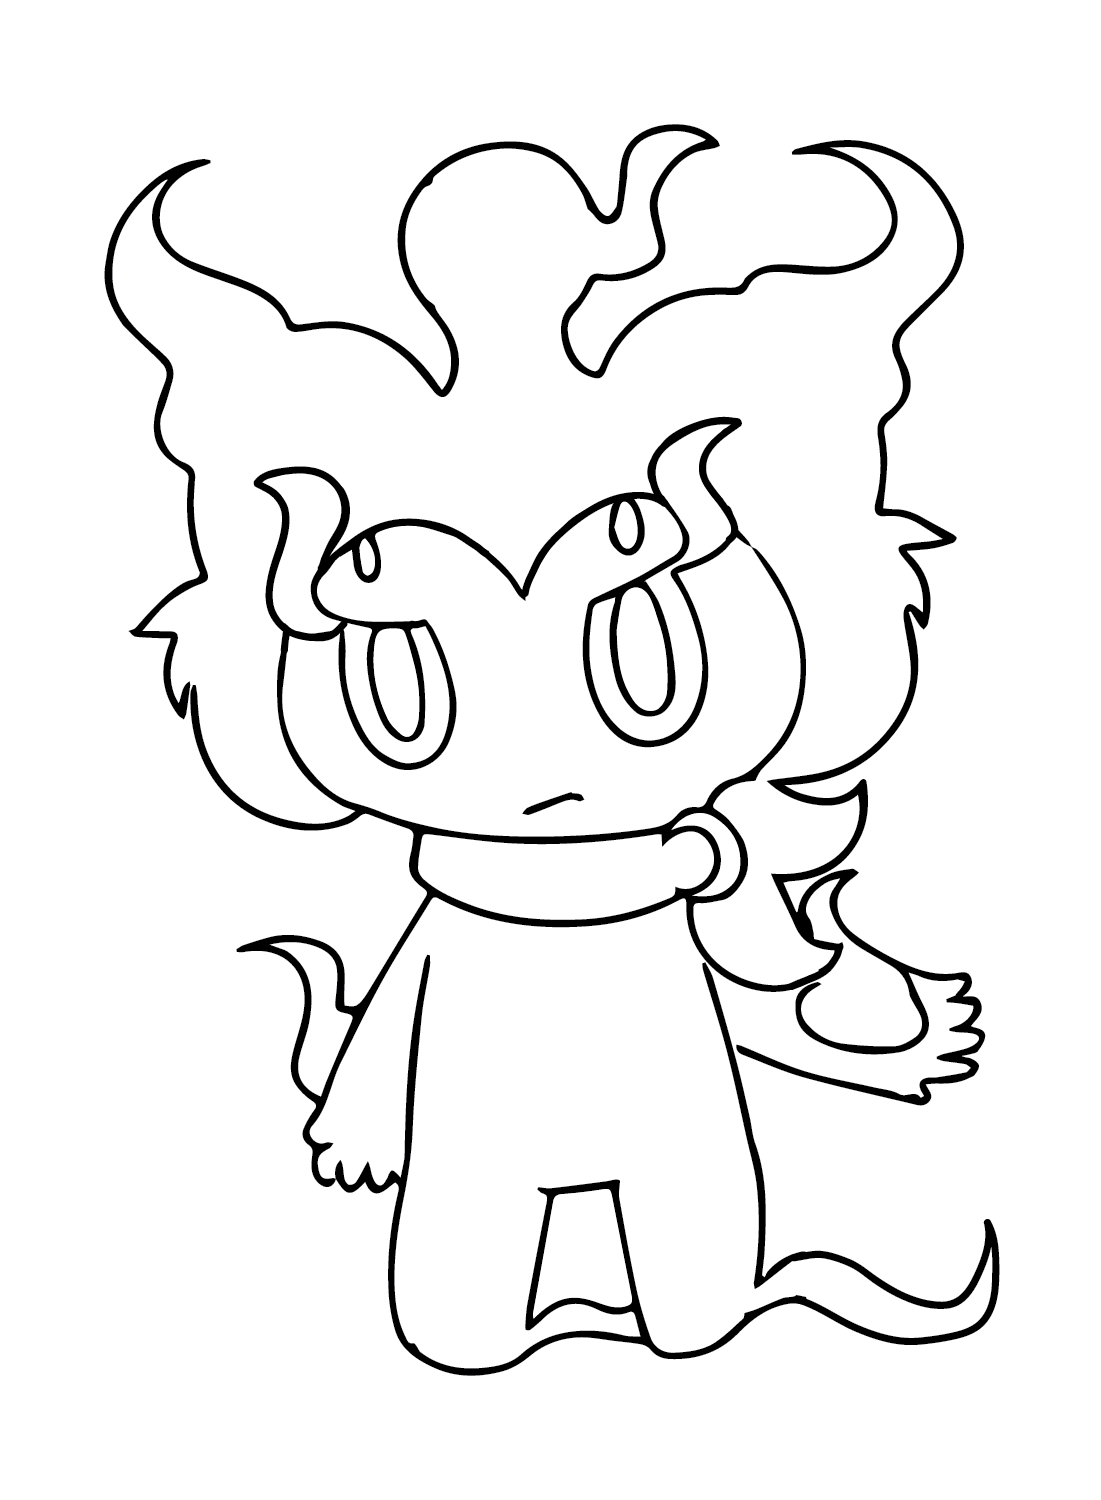 Marshadow can Color Coloring Page